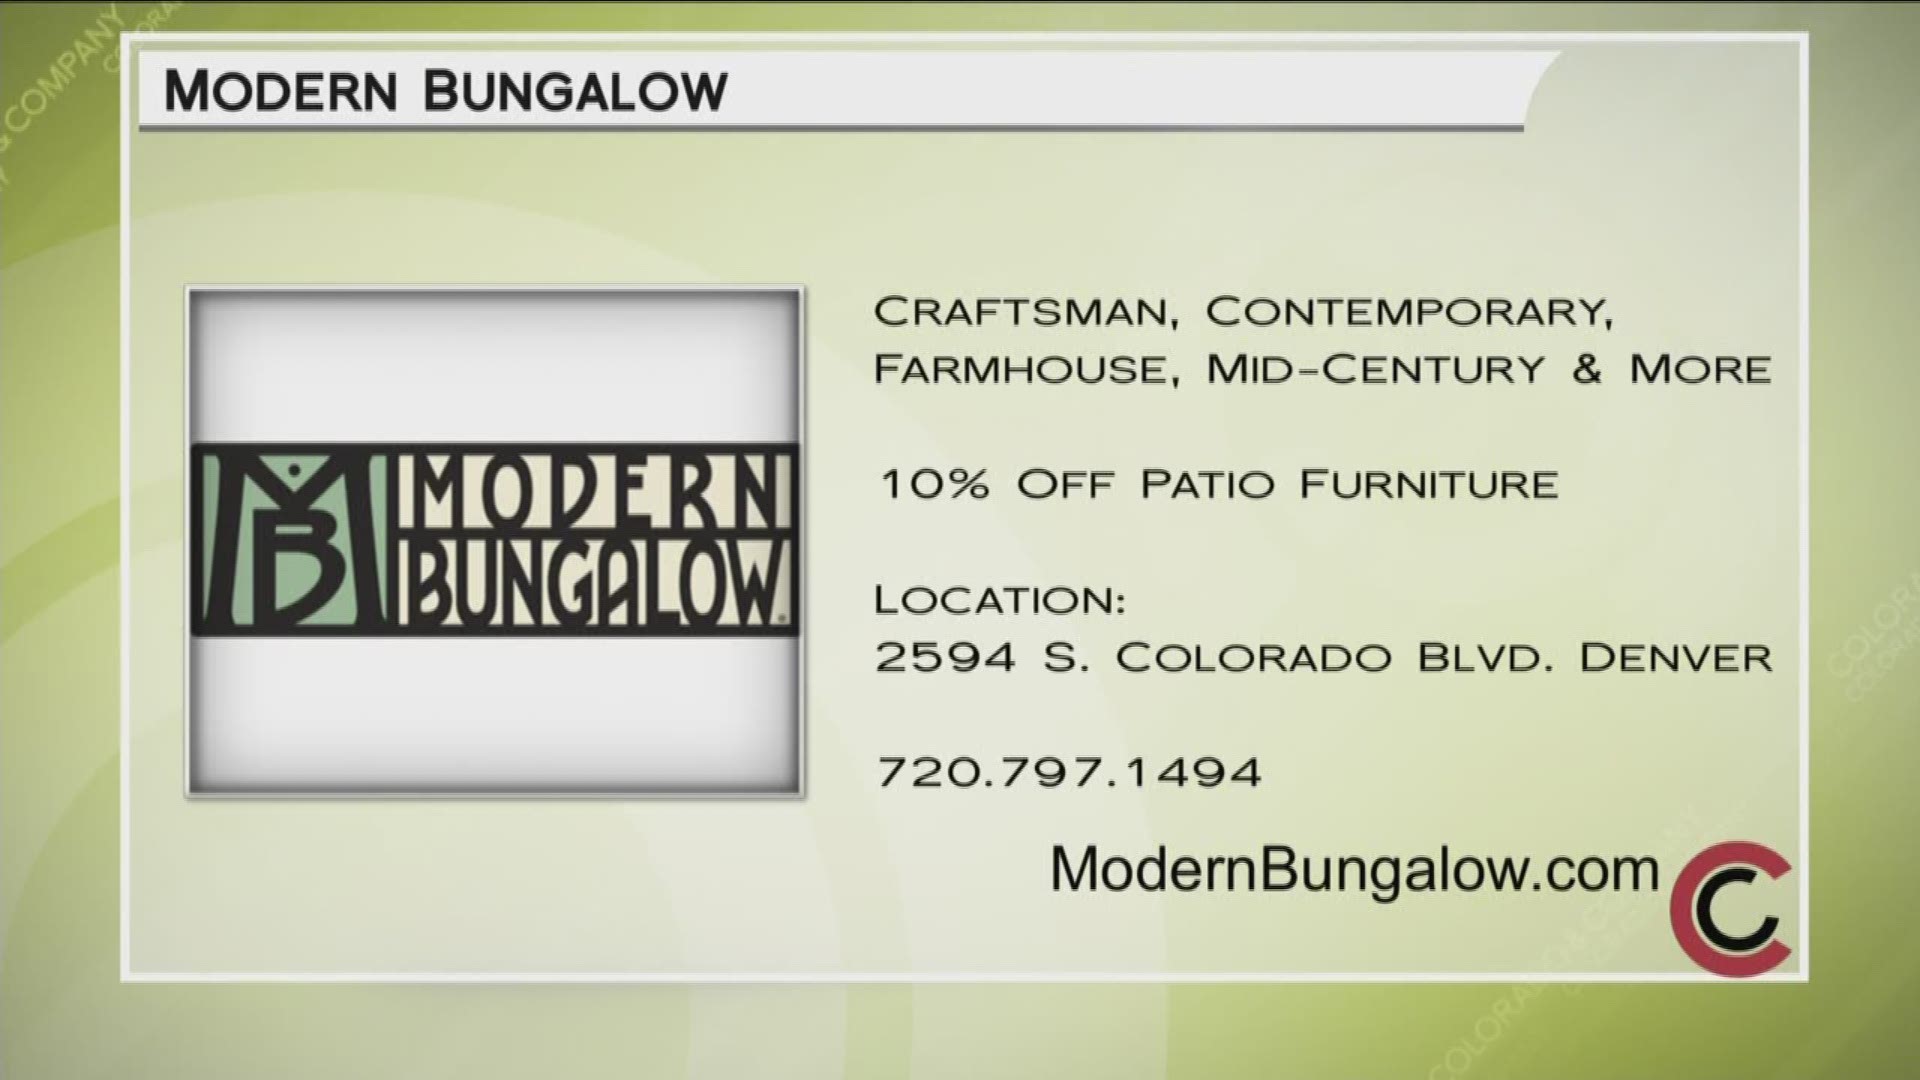 Craftsman, Contemporary, Farmhouse--Modern Bungalow has something to fit your style. Visit ModernBungalow.com or call 720.797.1494 to learn more.